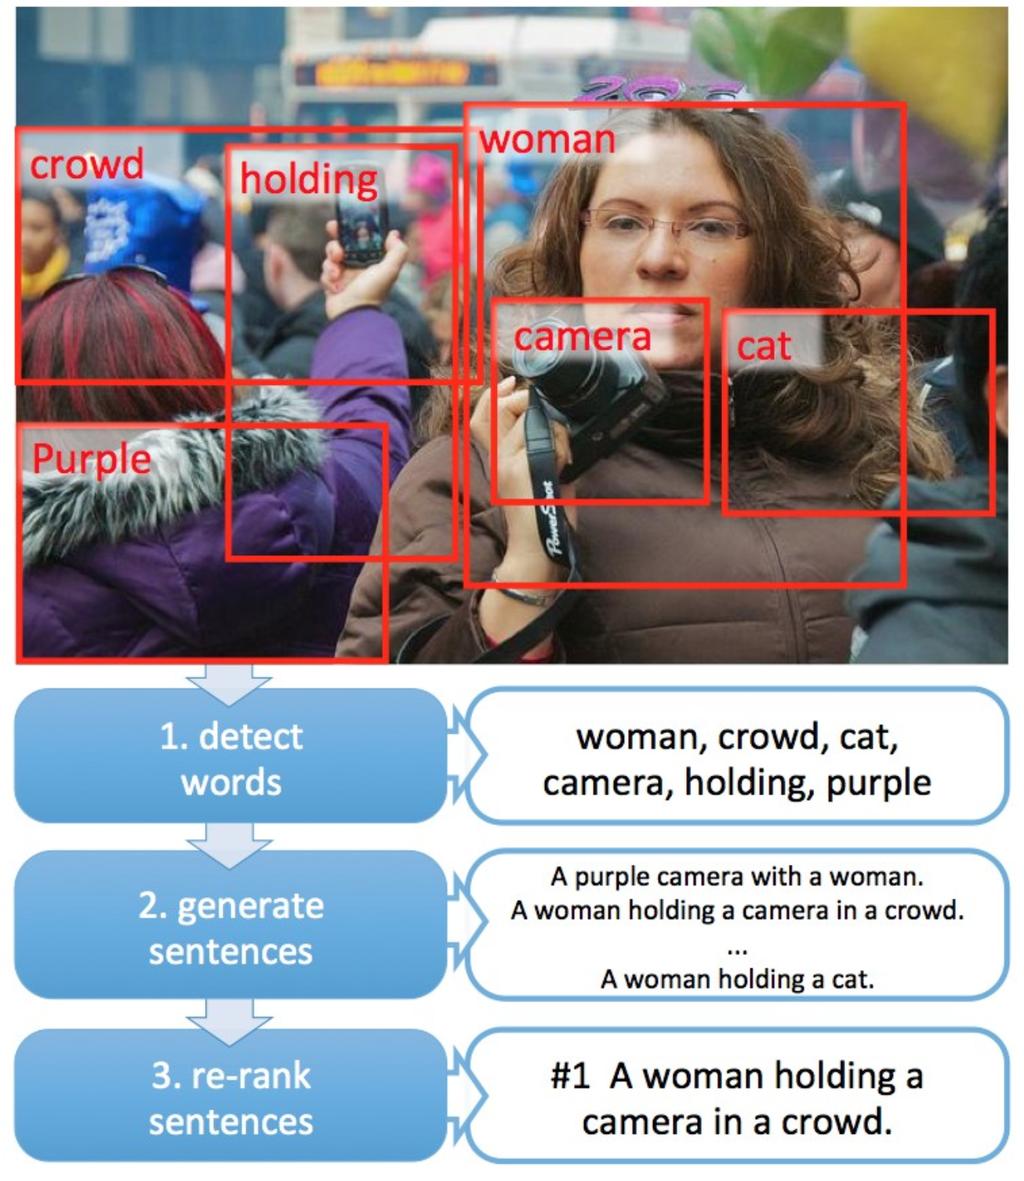 Image Captioning Automatically generating image descriptions: Image source: Fang, H. et al. (2015). From captions to visual concepts and back.